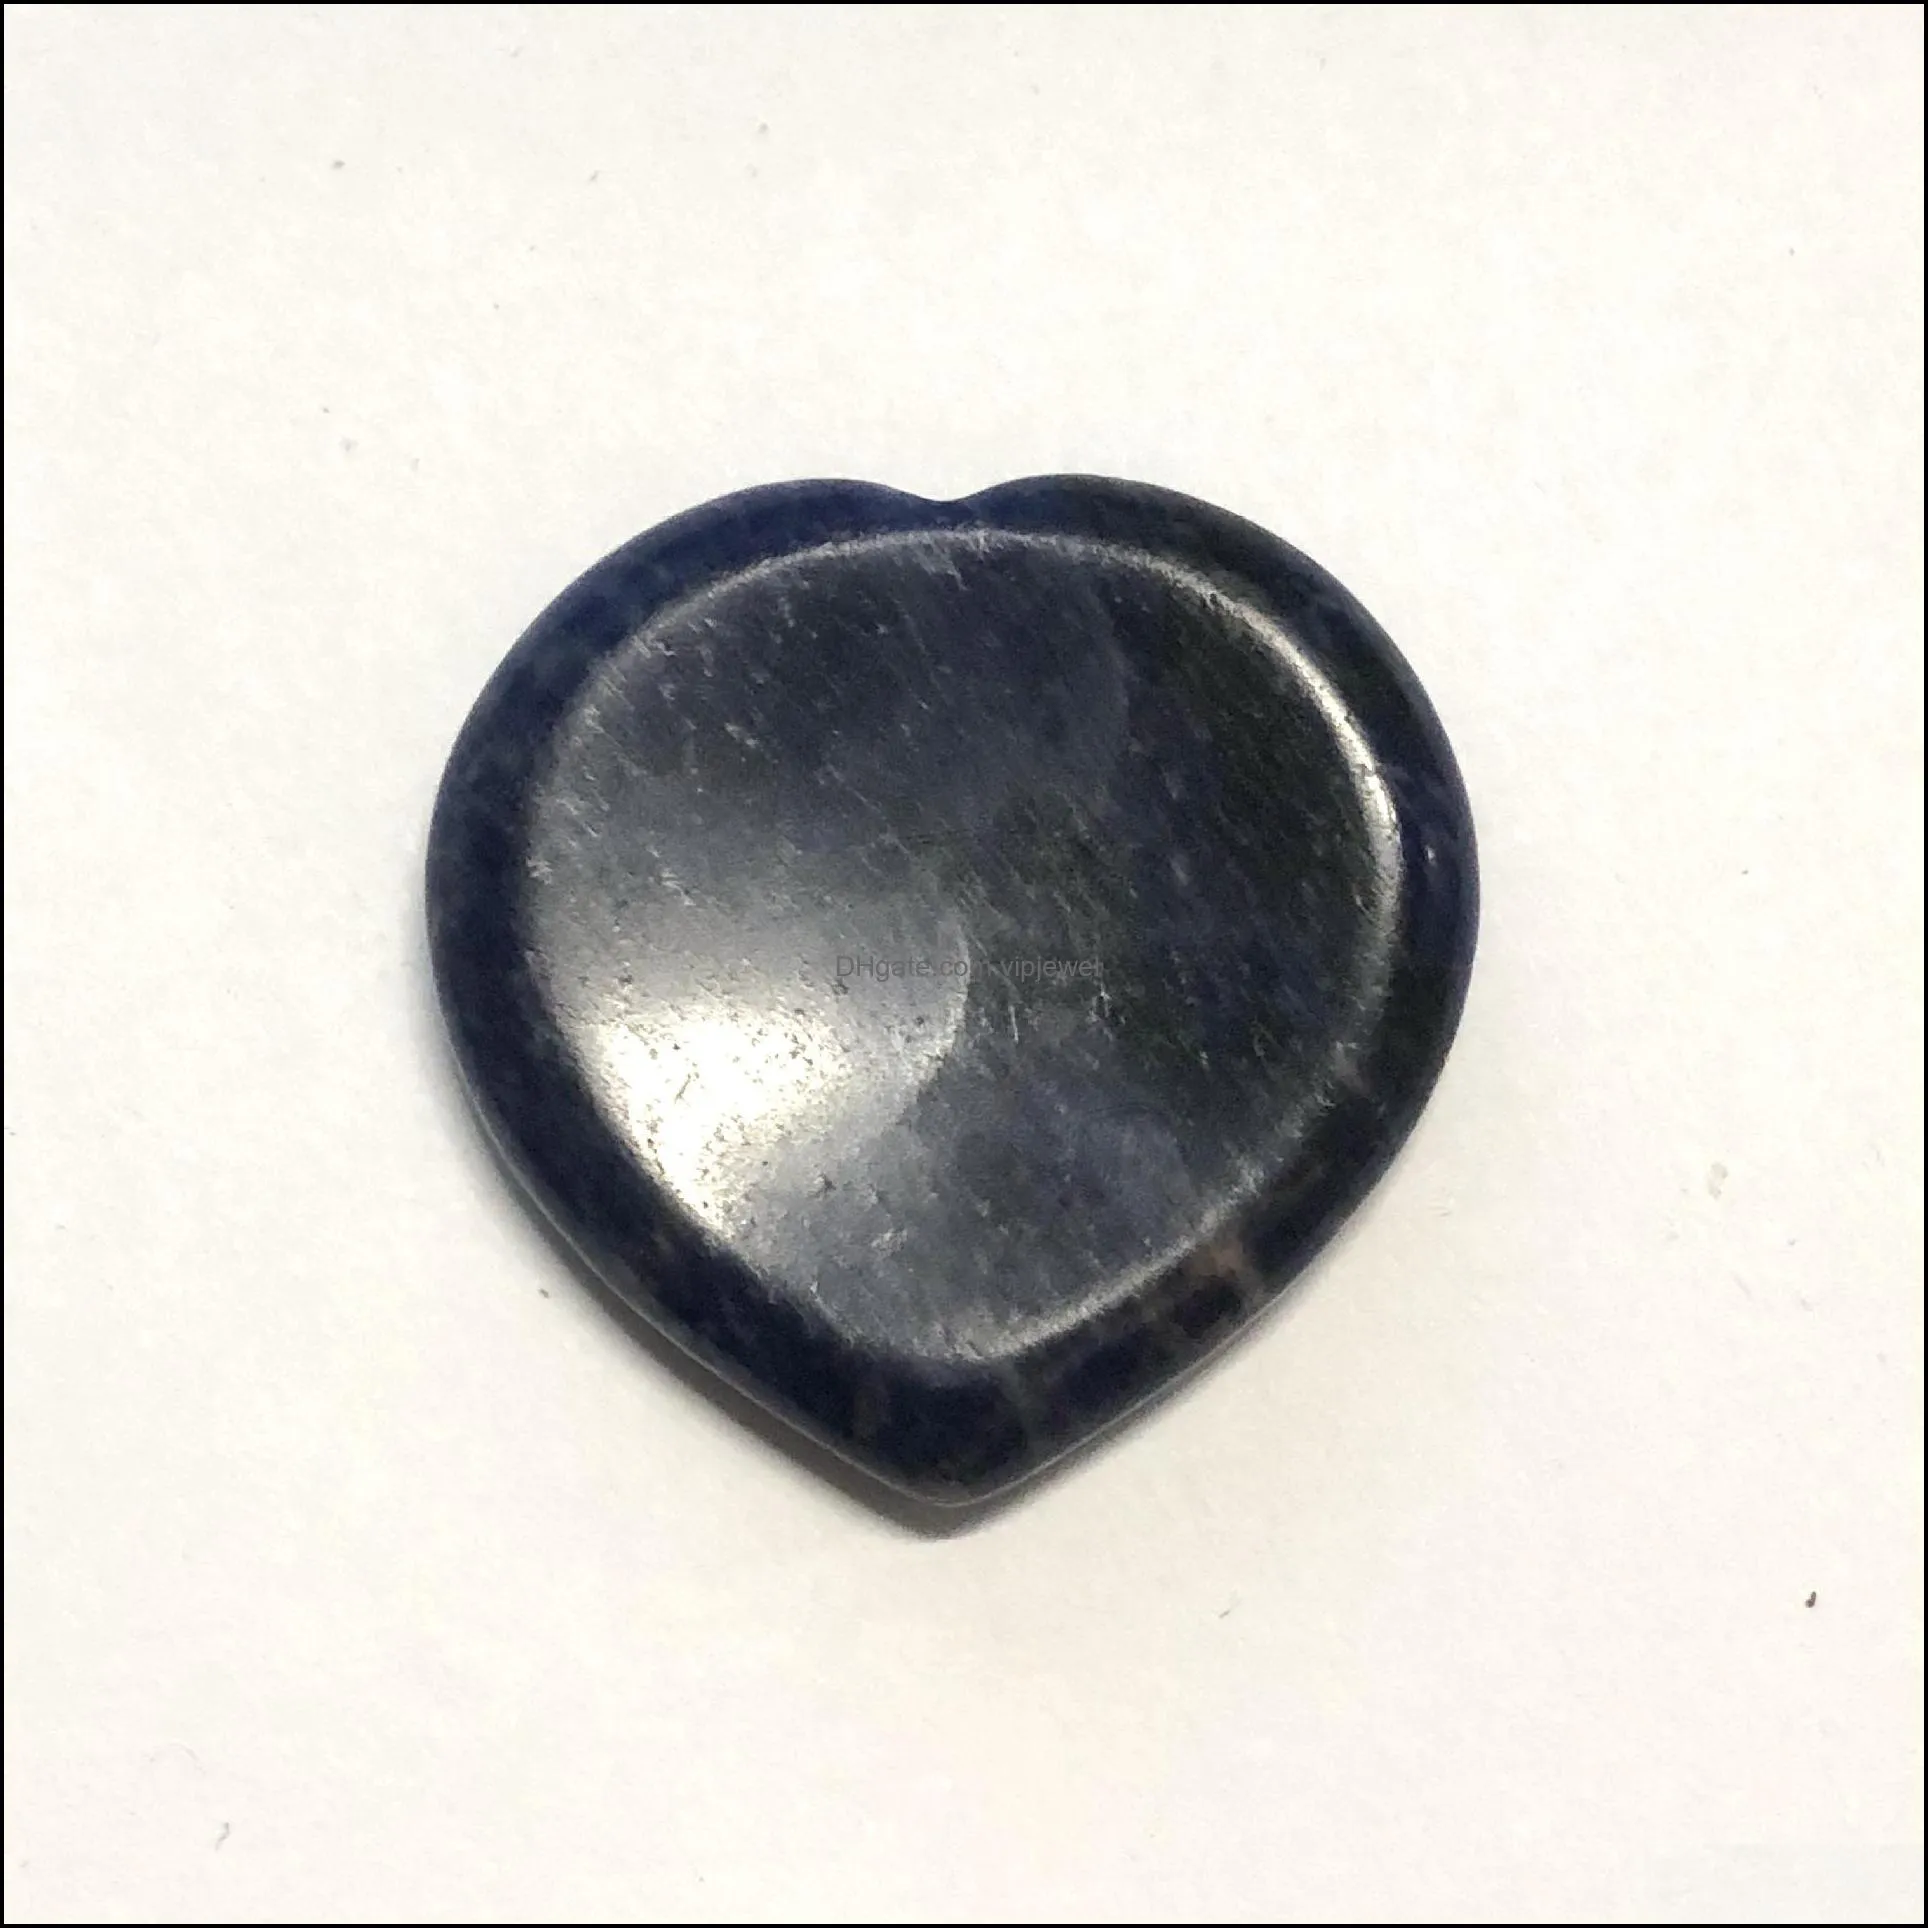 heart worry stone natural energy healing crystal stone thumb massage chakra wicca reiki spiritual therapy minerales ornaments crafts